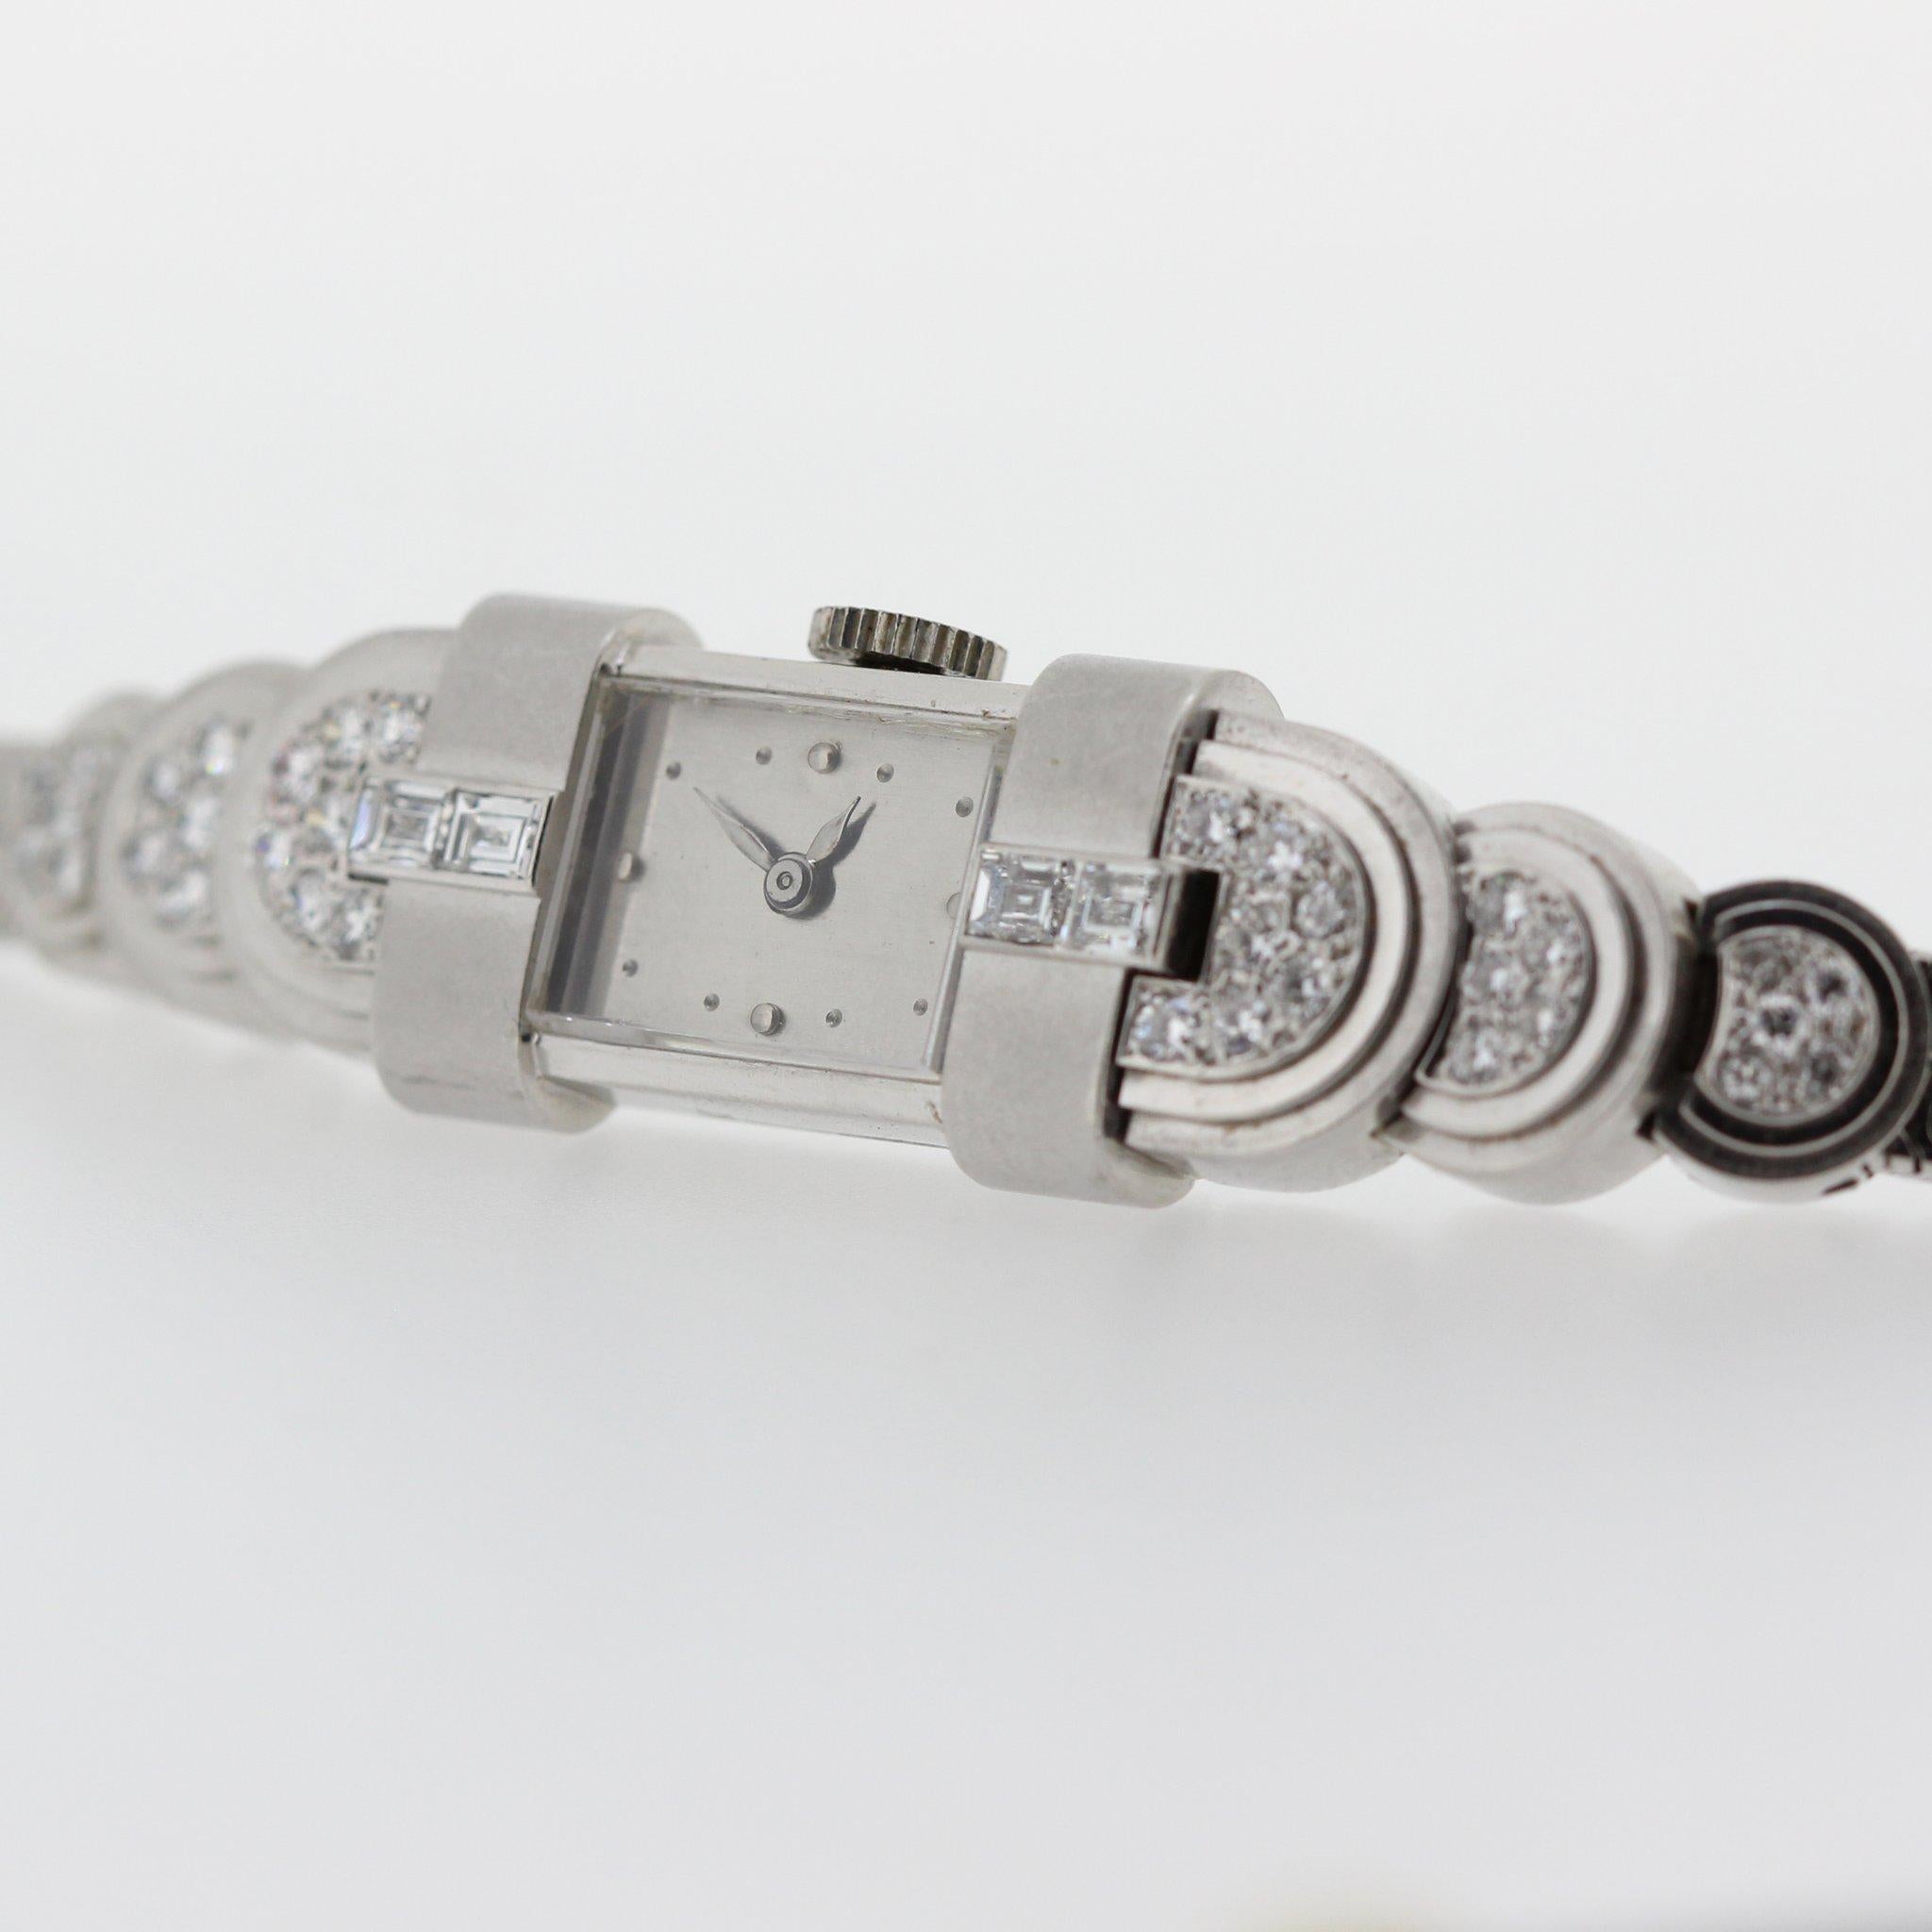 This Patek Philippe Art Deco Platinum and diamond ladies watch, circa 1949, features a baguette shaped case with 8